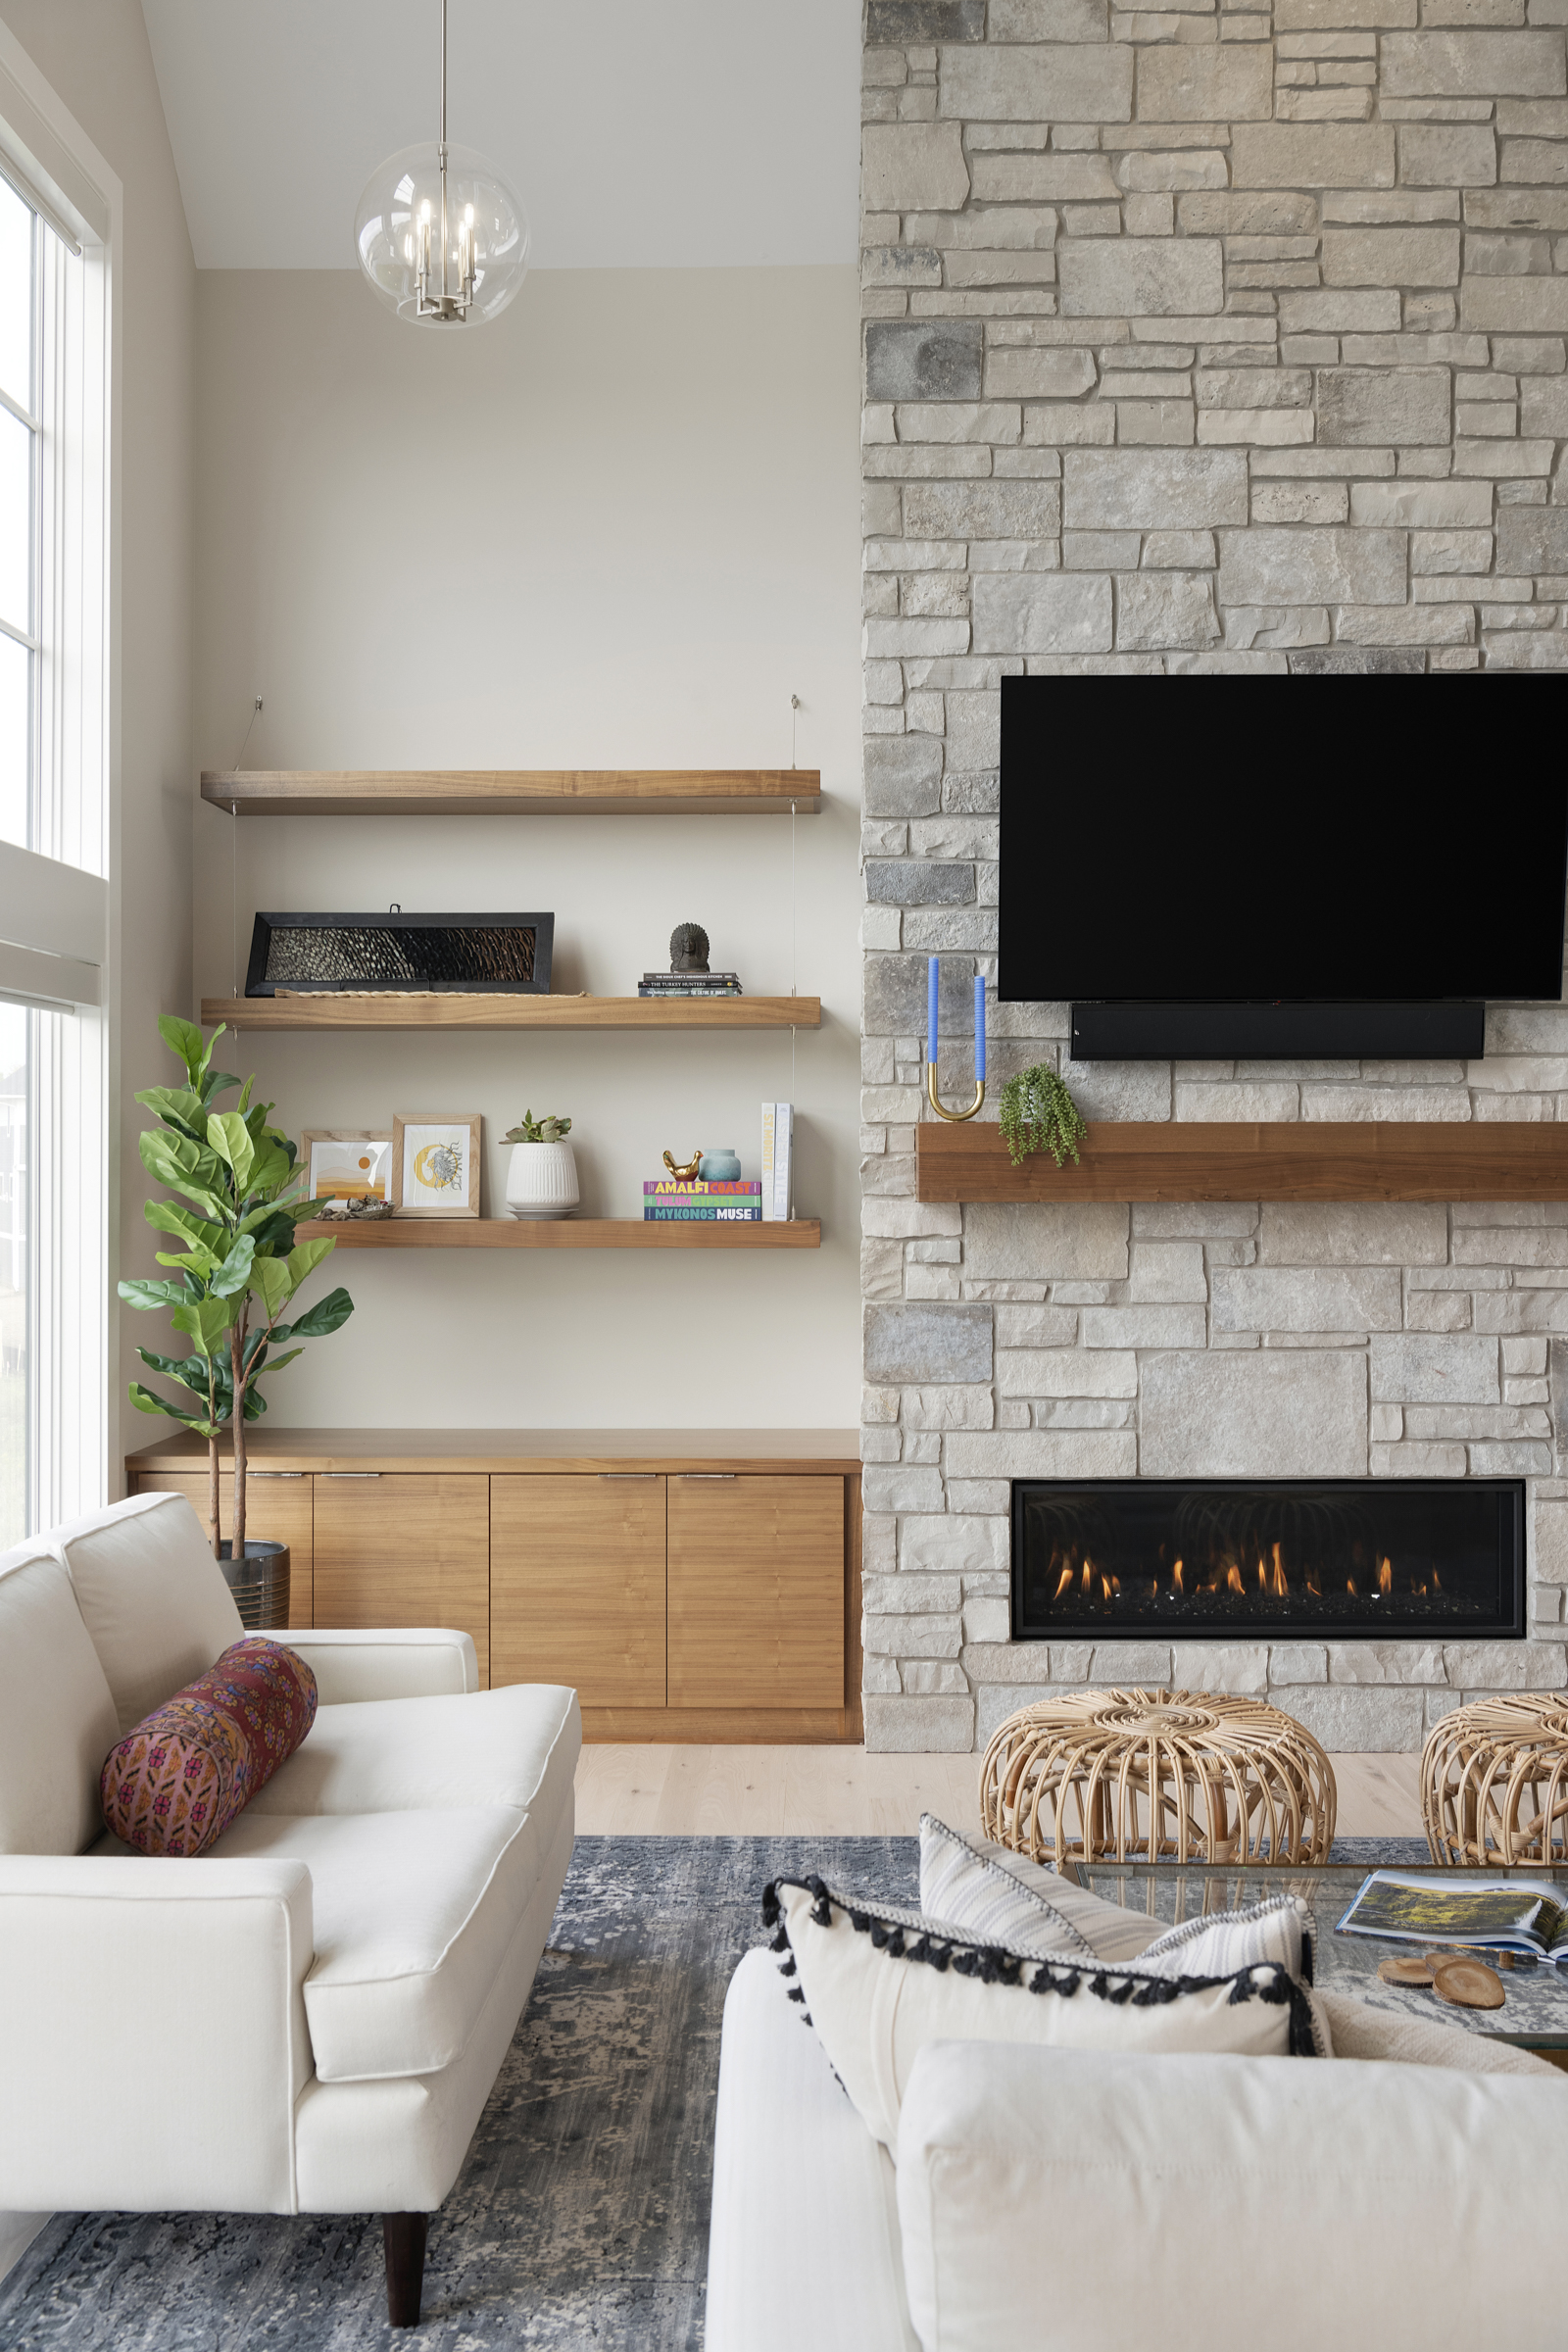 A prairie transitional living room with a stone fireplace and white furniture.